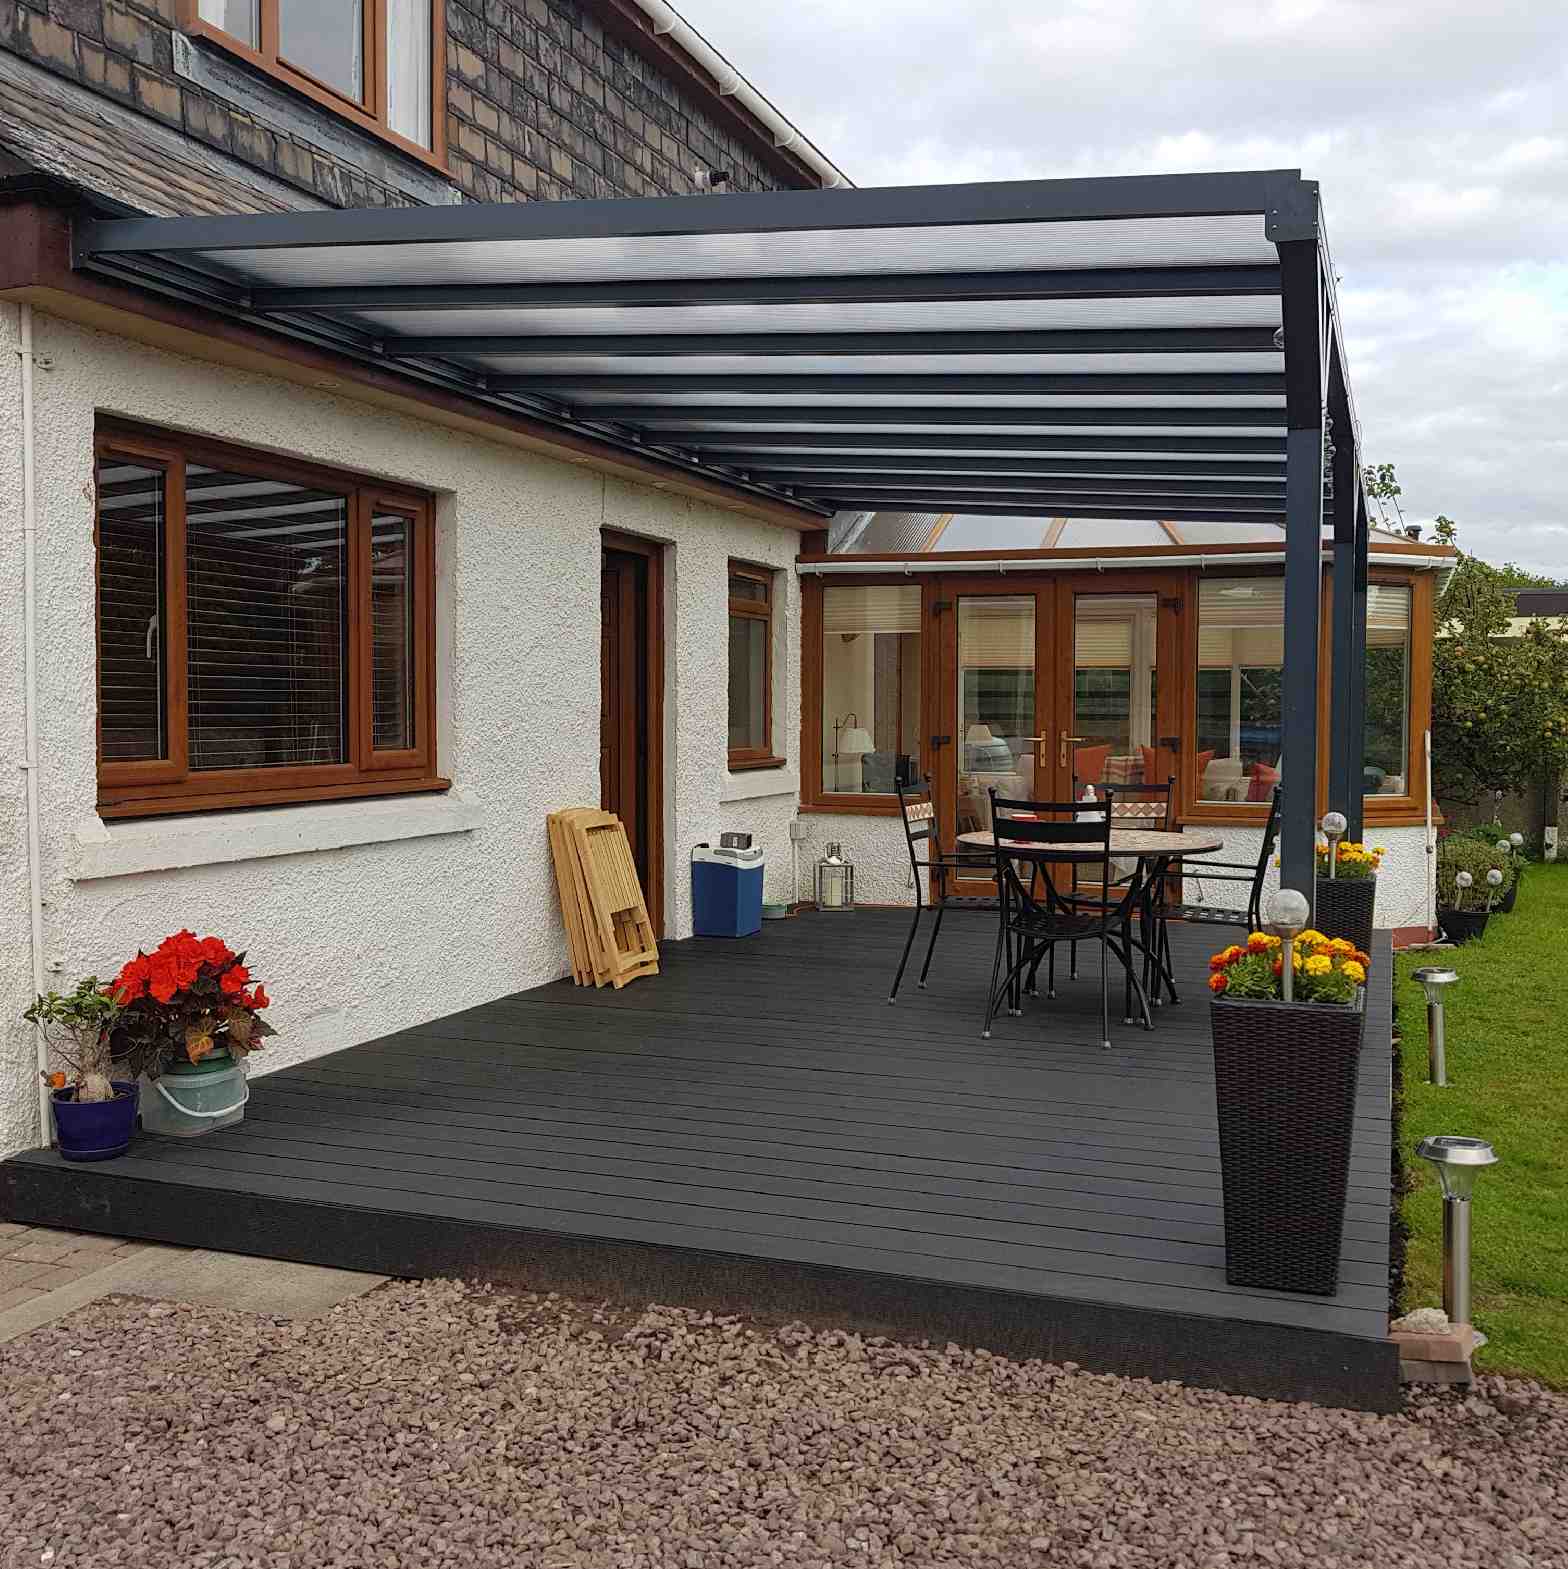 Buy Omega Verandah, Anthracite Grey, 16mm Polycarbonate Glazing - 2.1m (W) x 3.5m (P), (2) Supporting Posts online today